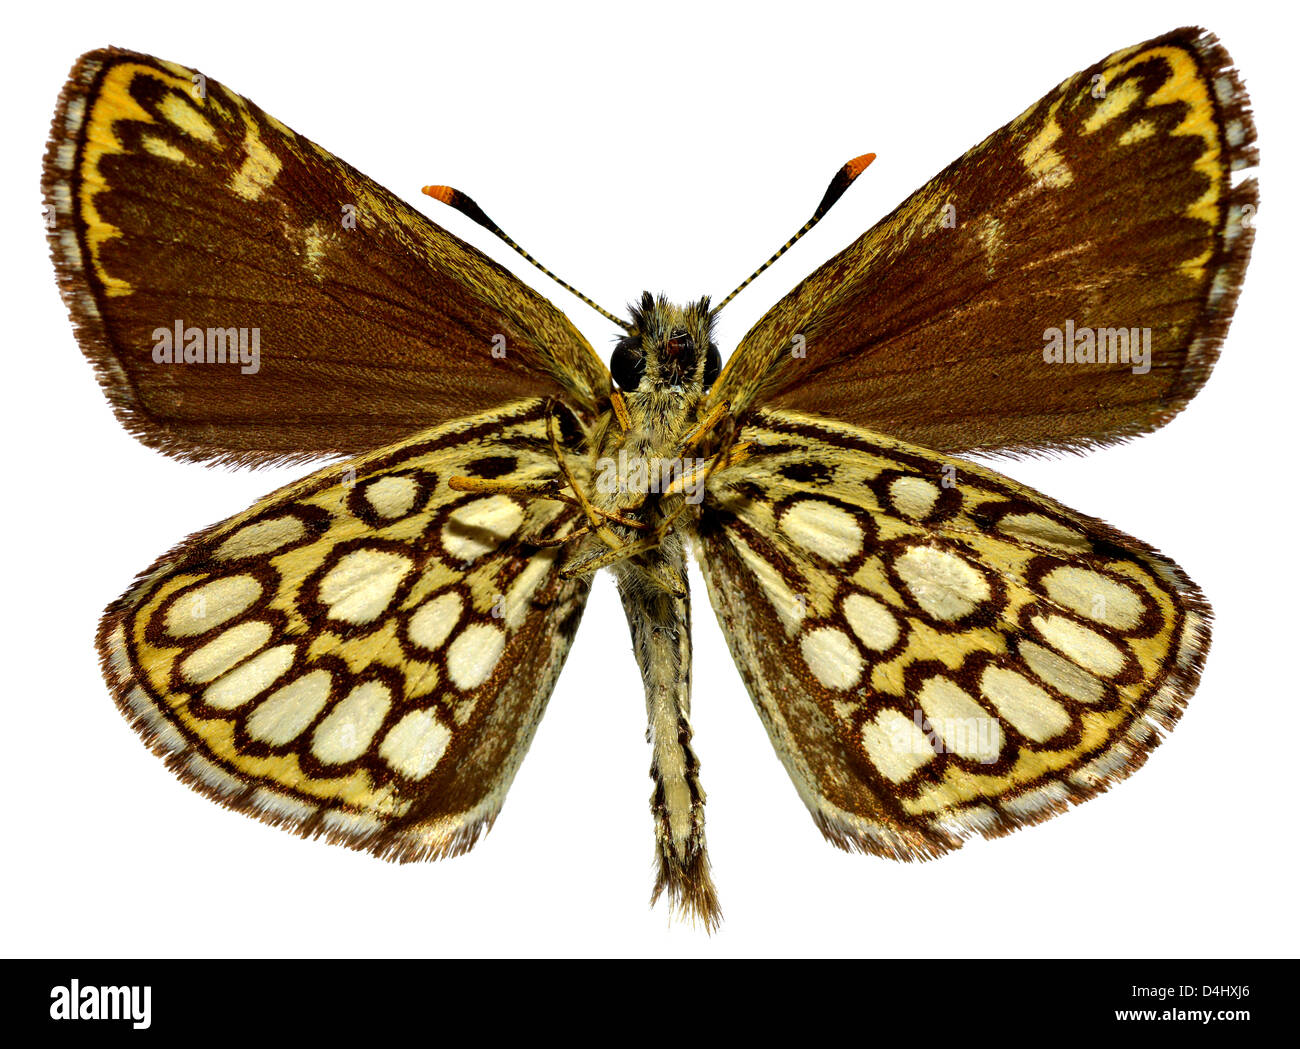 Large Chequered Skipper butterfly (Heteropterus morpheus) viewed from below isolated on white background Stock Photo